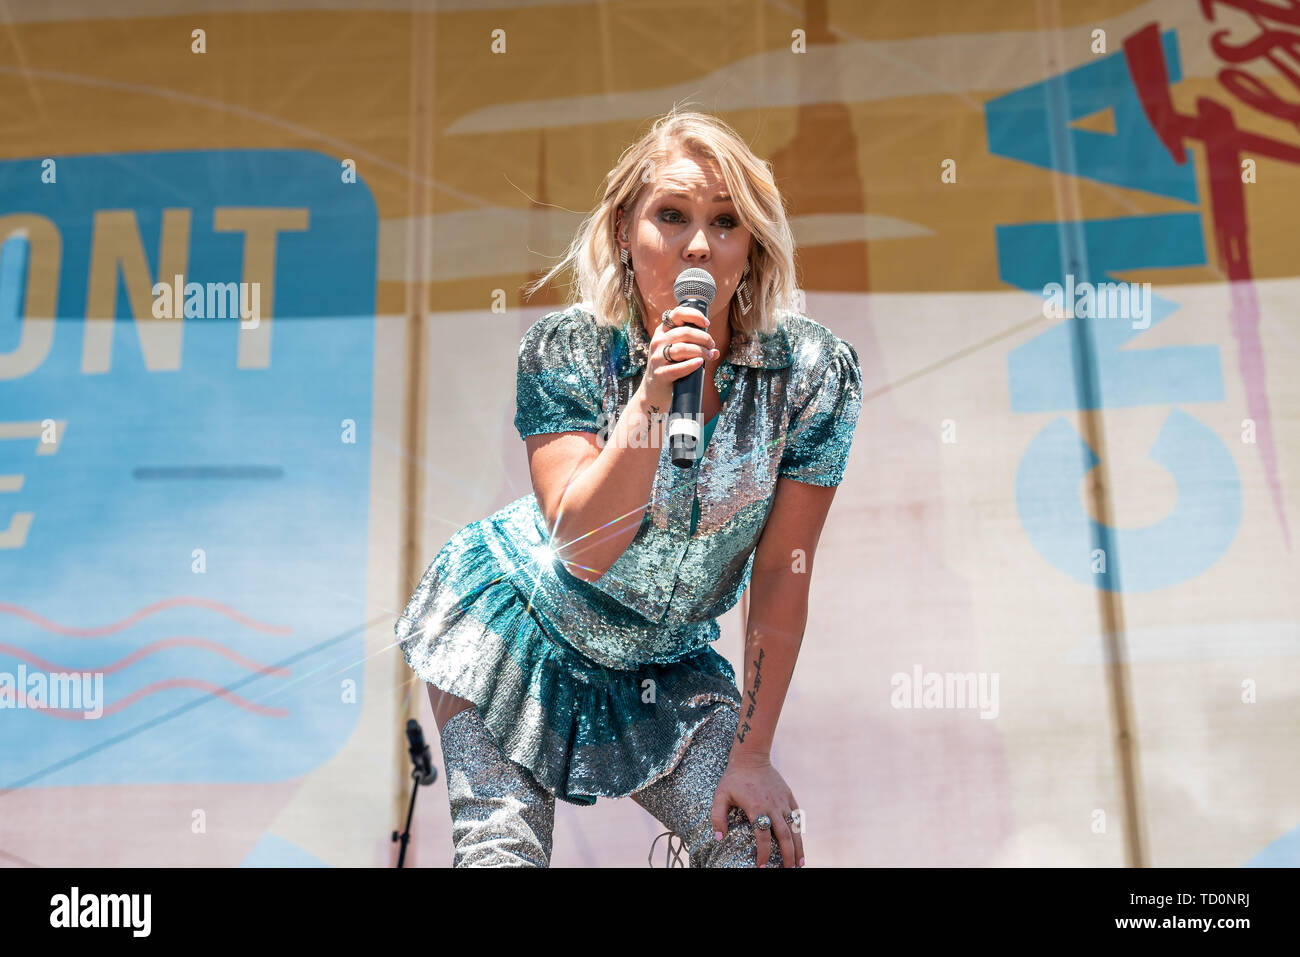 NASHVILLE, TENNESSEE - JUNE 09: RaeLynn performs on stage for day 4 of the 2019 CMA Music Festival on June 09, 2019 in Nashville, Tennessee. Photo: Andrew Wendowski for imageSPACE/MediaPunch Stock Photo